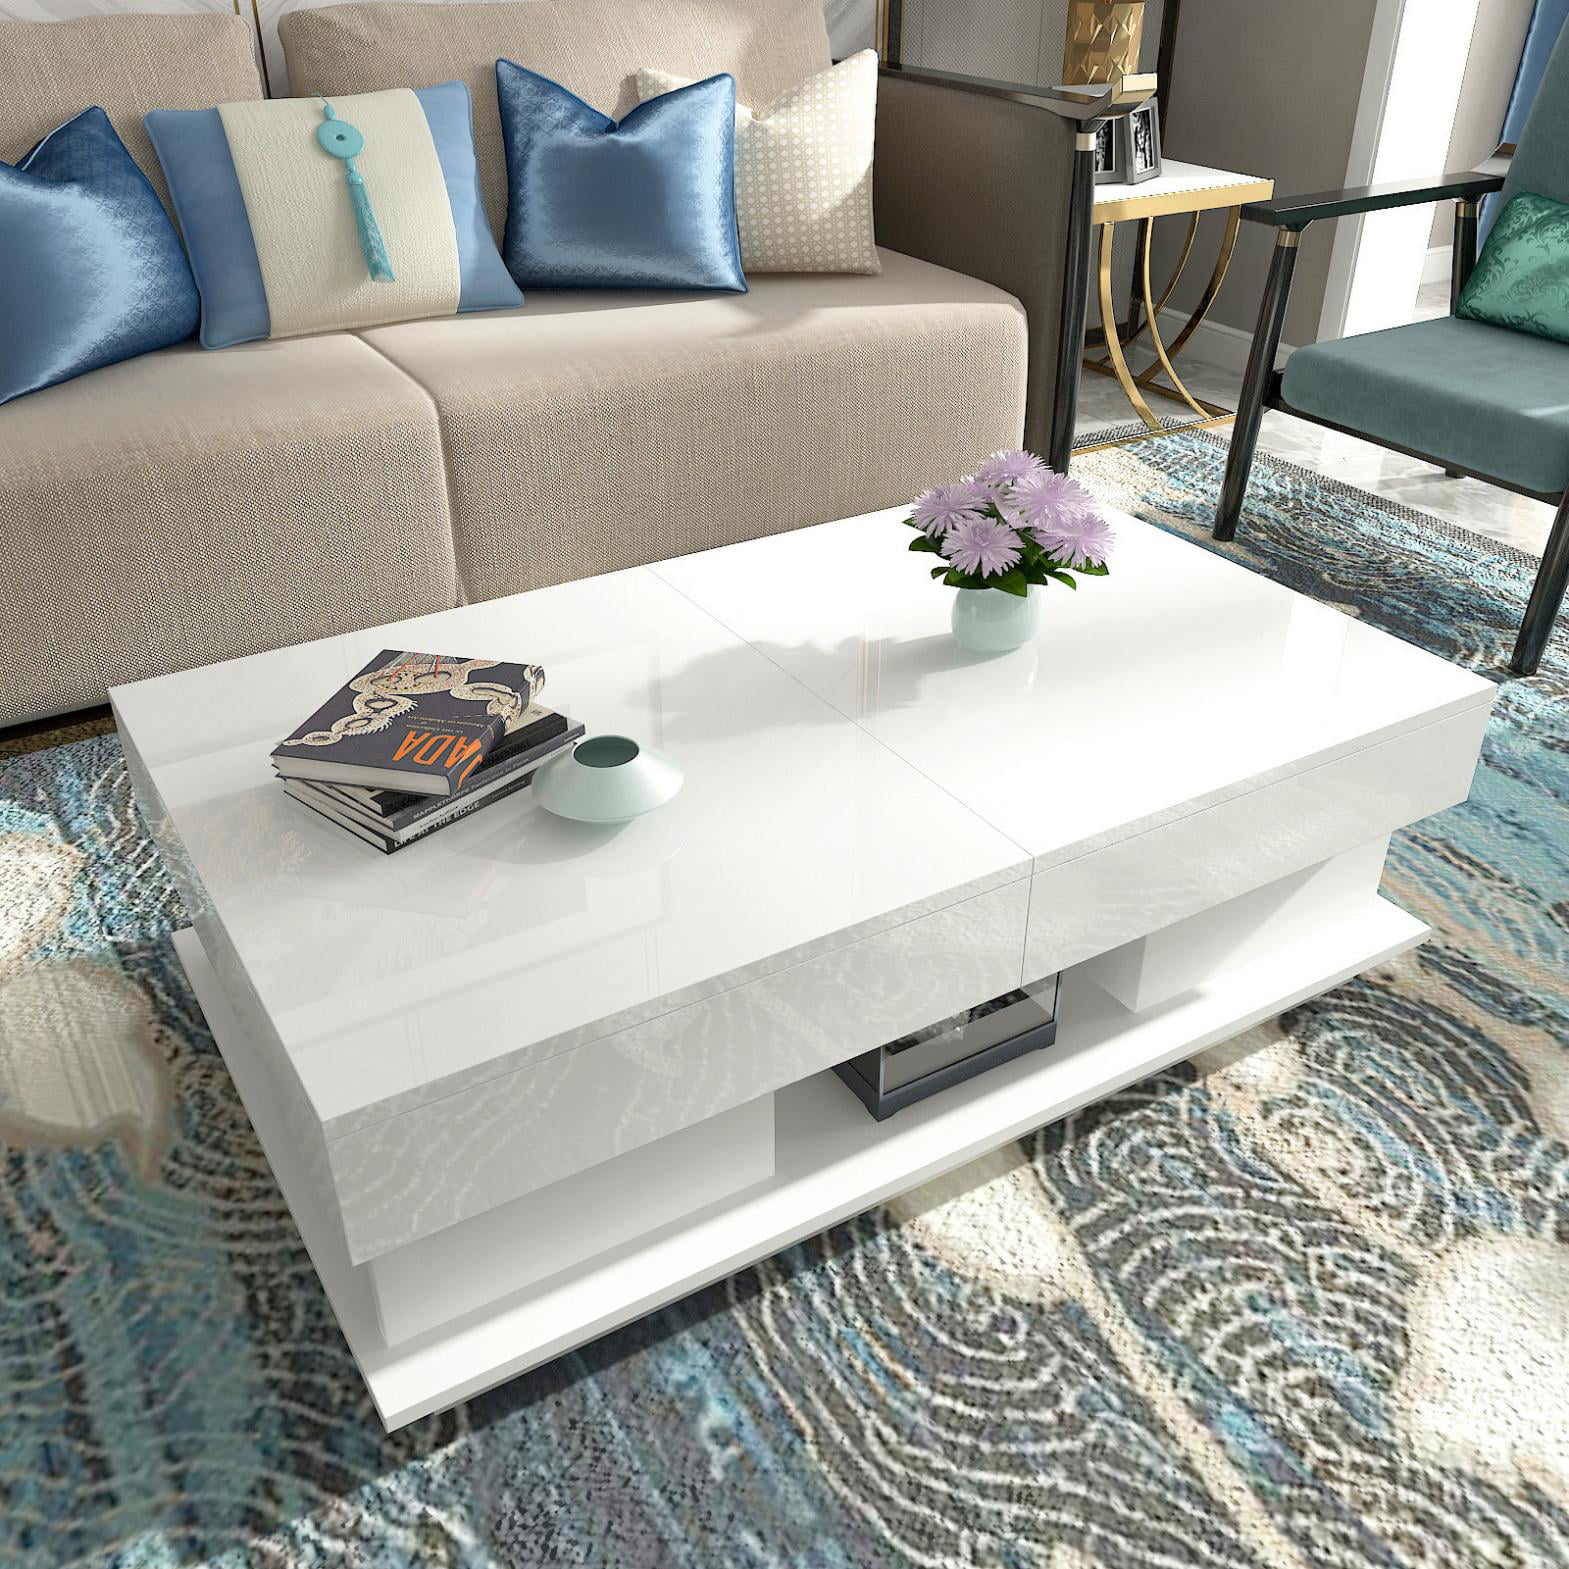 Ballshop Modern Drawers Coffee Table Storage High Gloss Slide Top with Storage Inside and 4 Drawers Living Room Furniture White